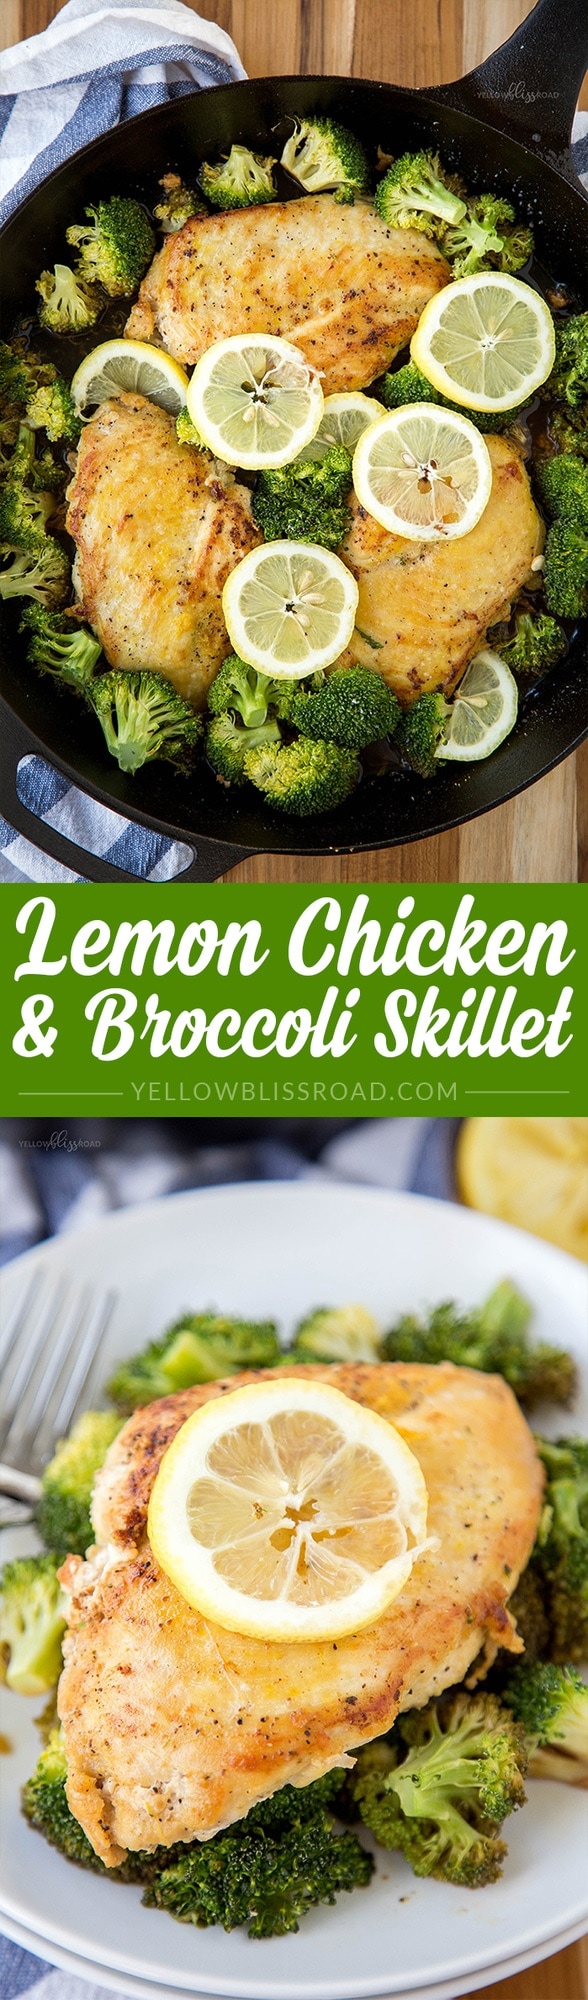 Lemon Chicken & Broccoli Skillet - 30 minutes and one skillet is all you need to make this easy dinner recipe